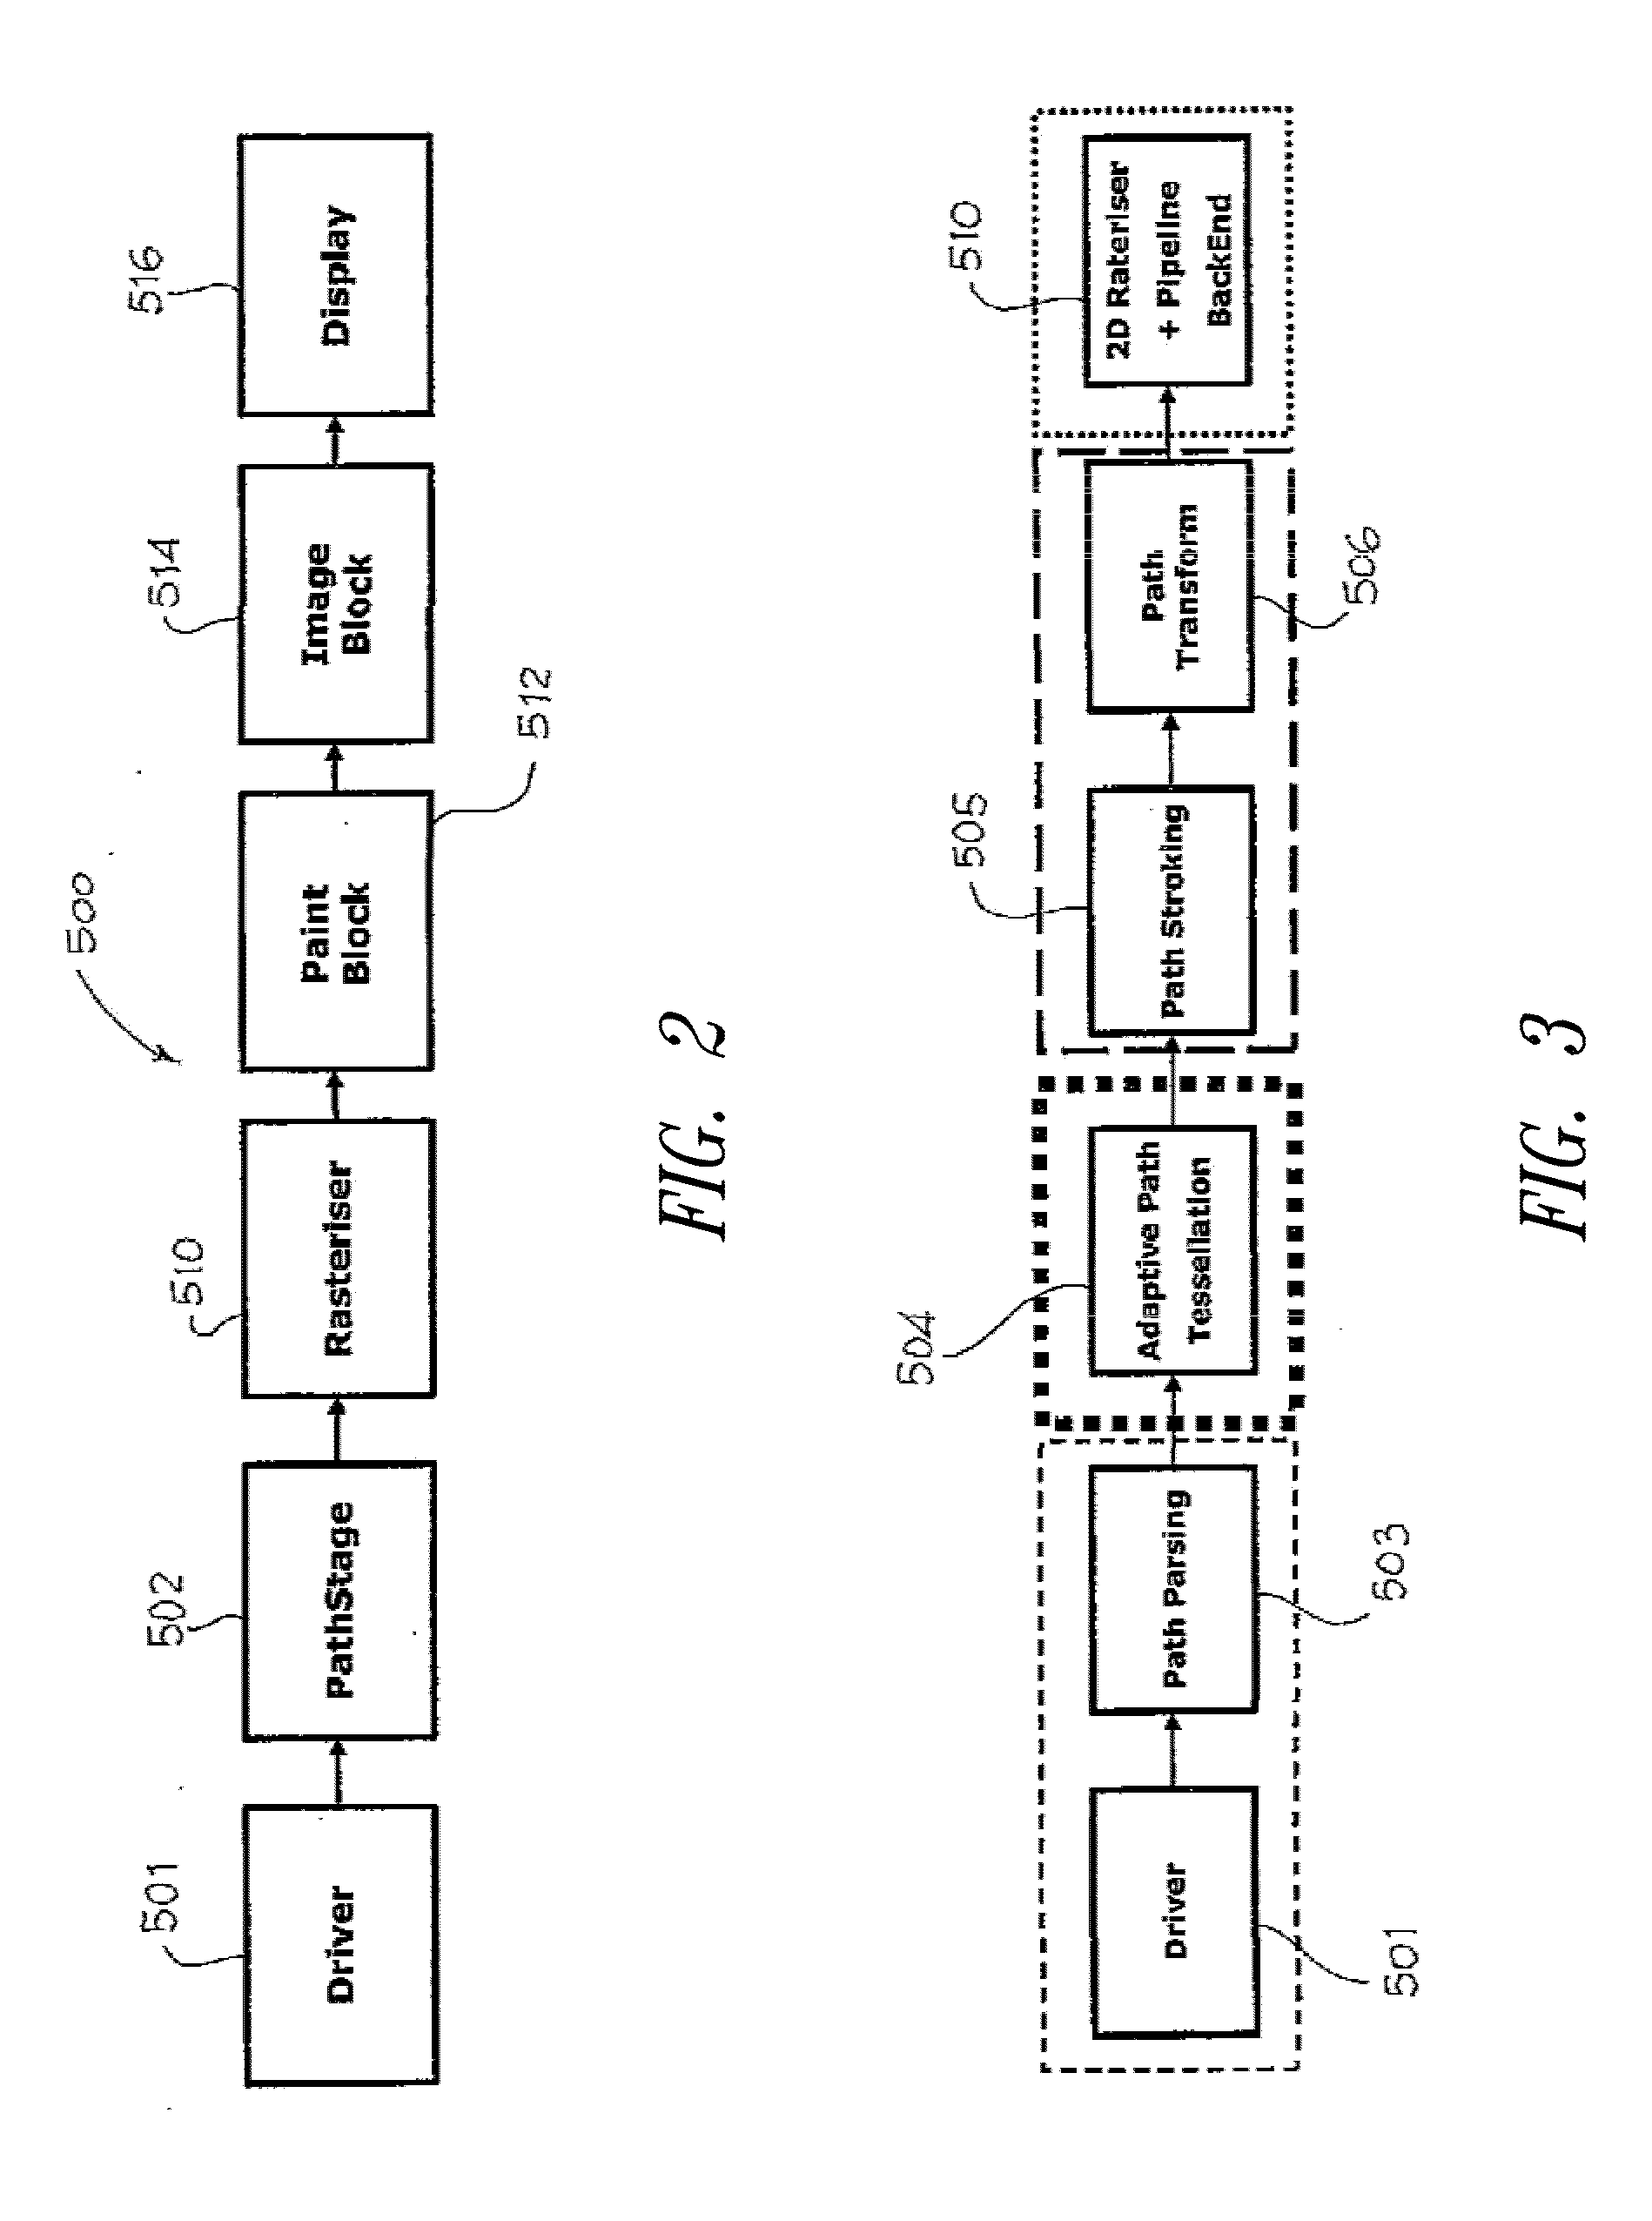 System and method for adaptive tessellation of a curve